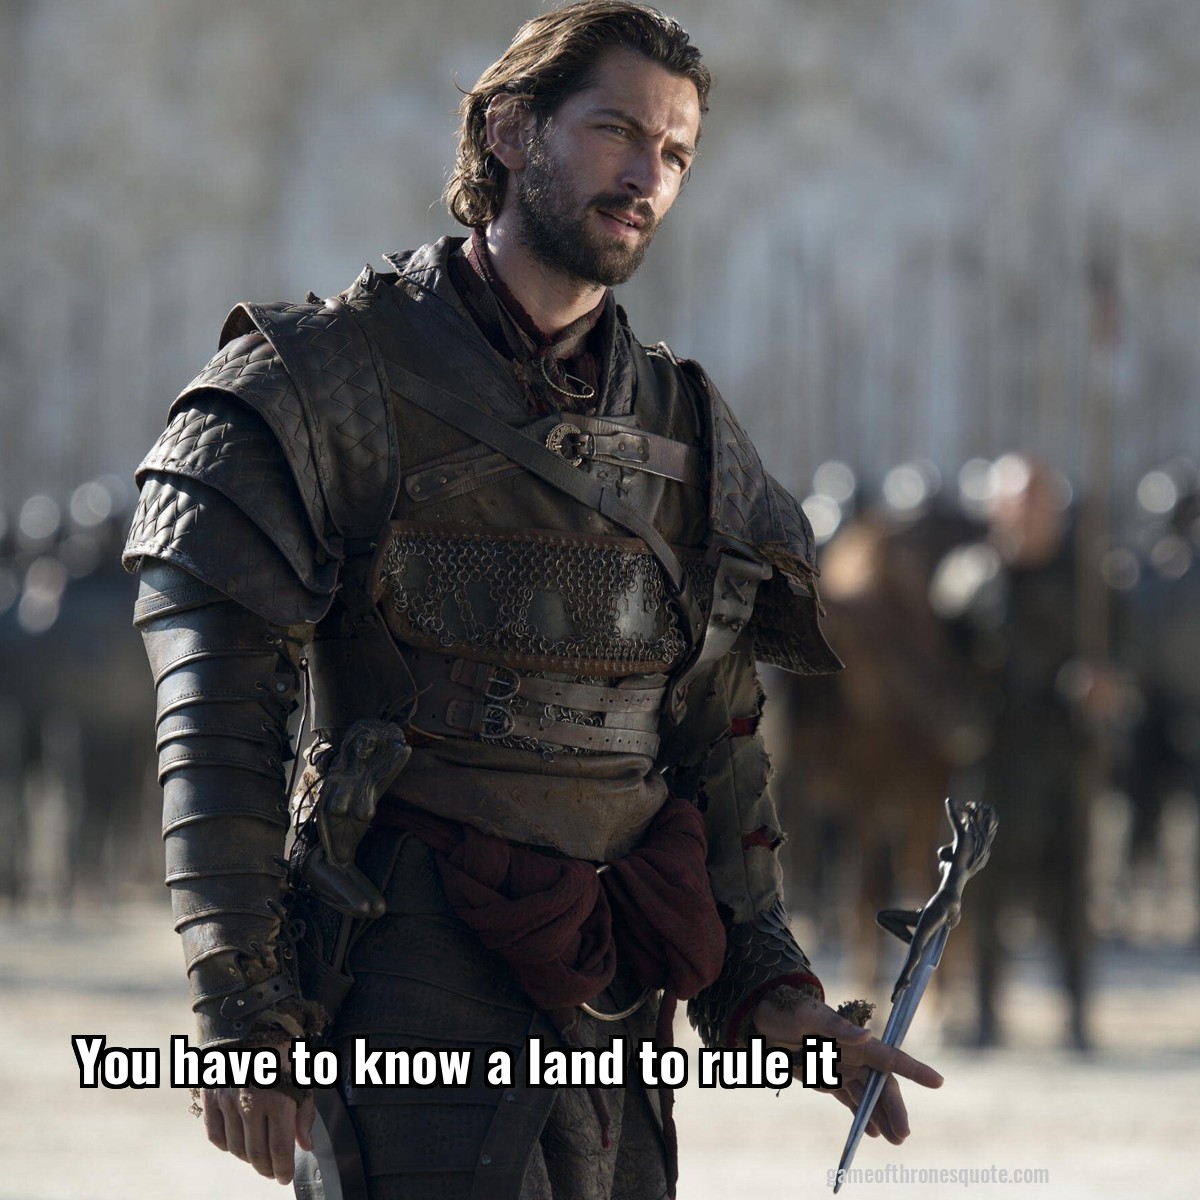 You have to know a land to rule it